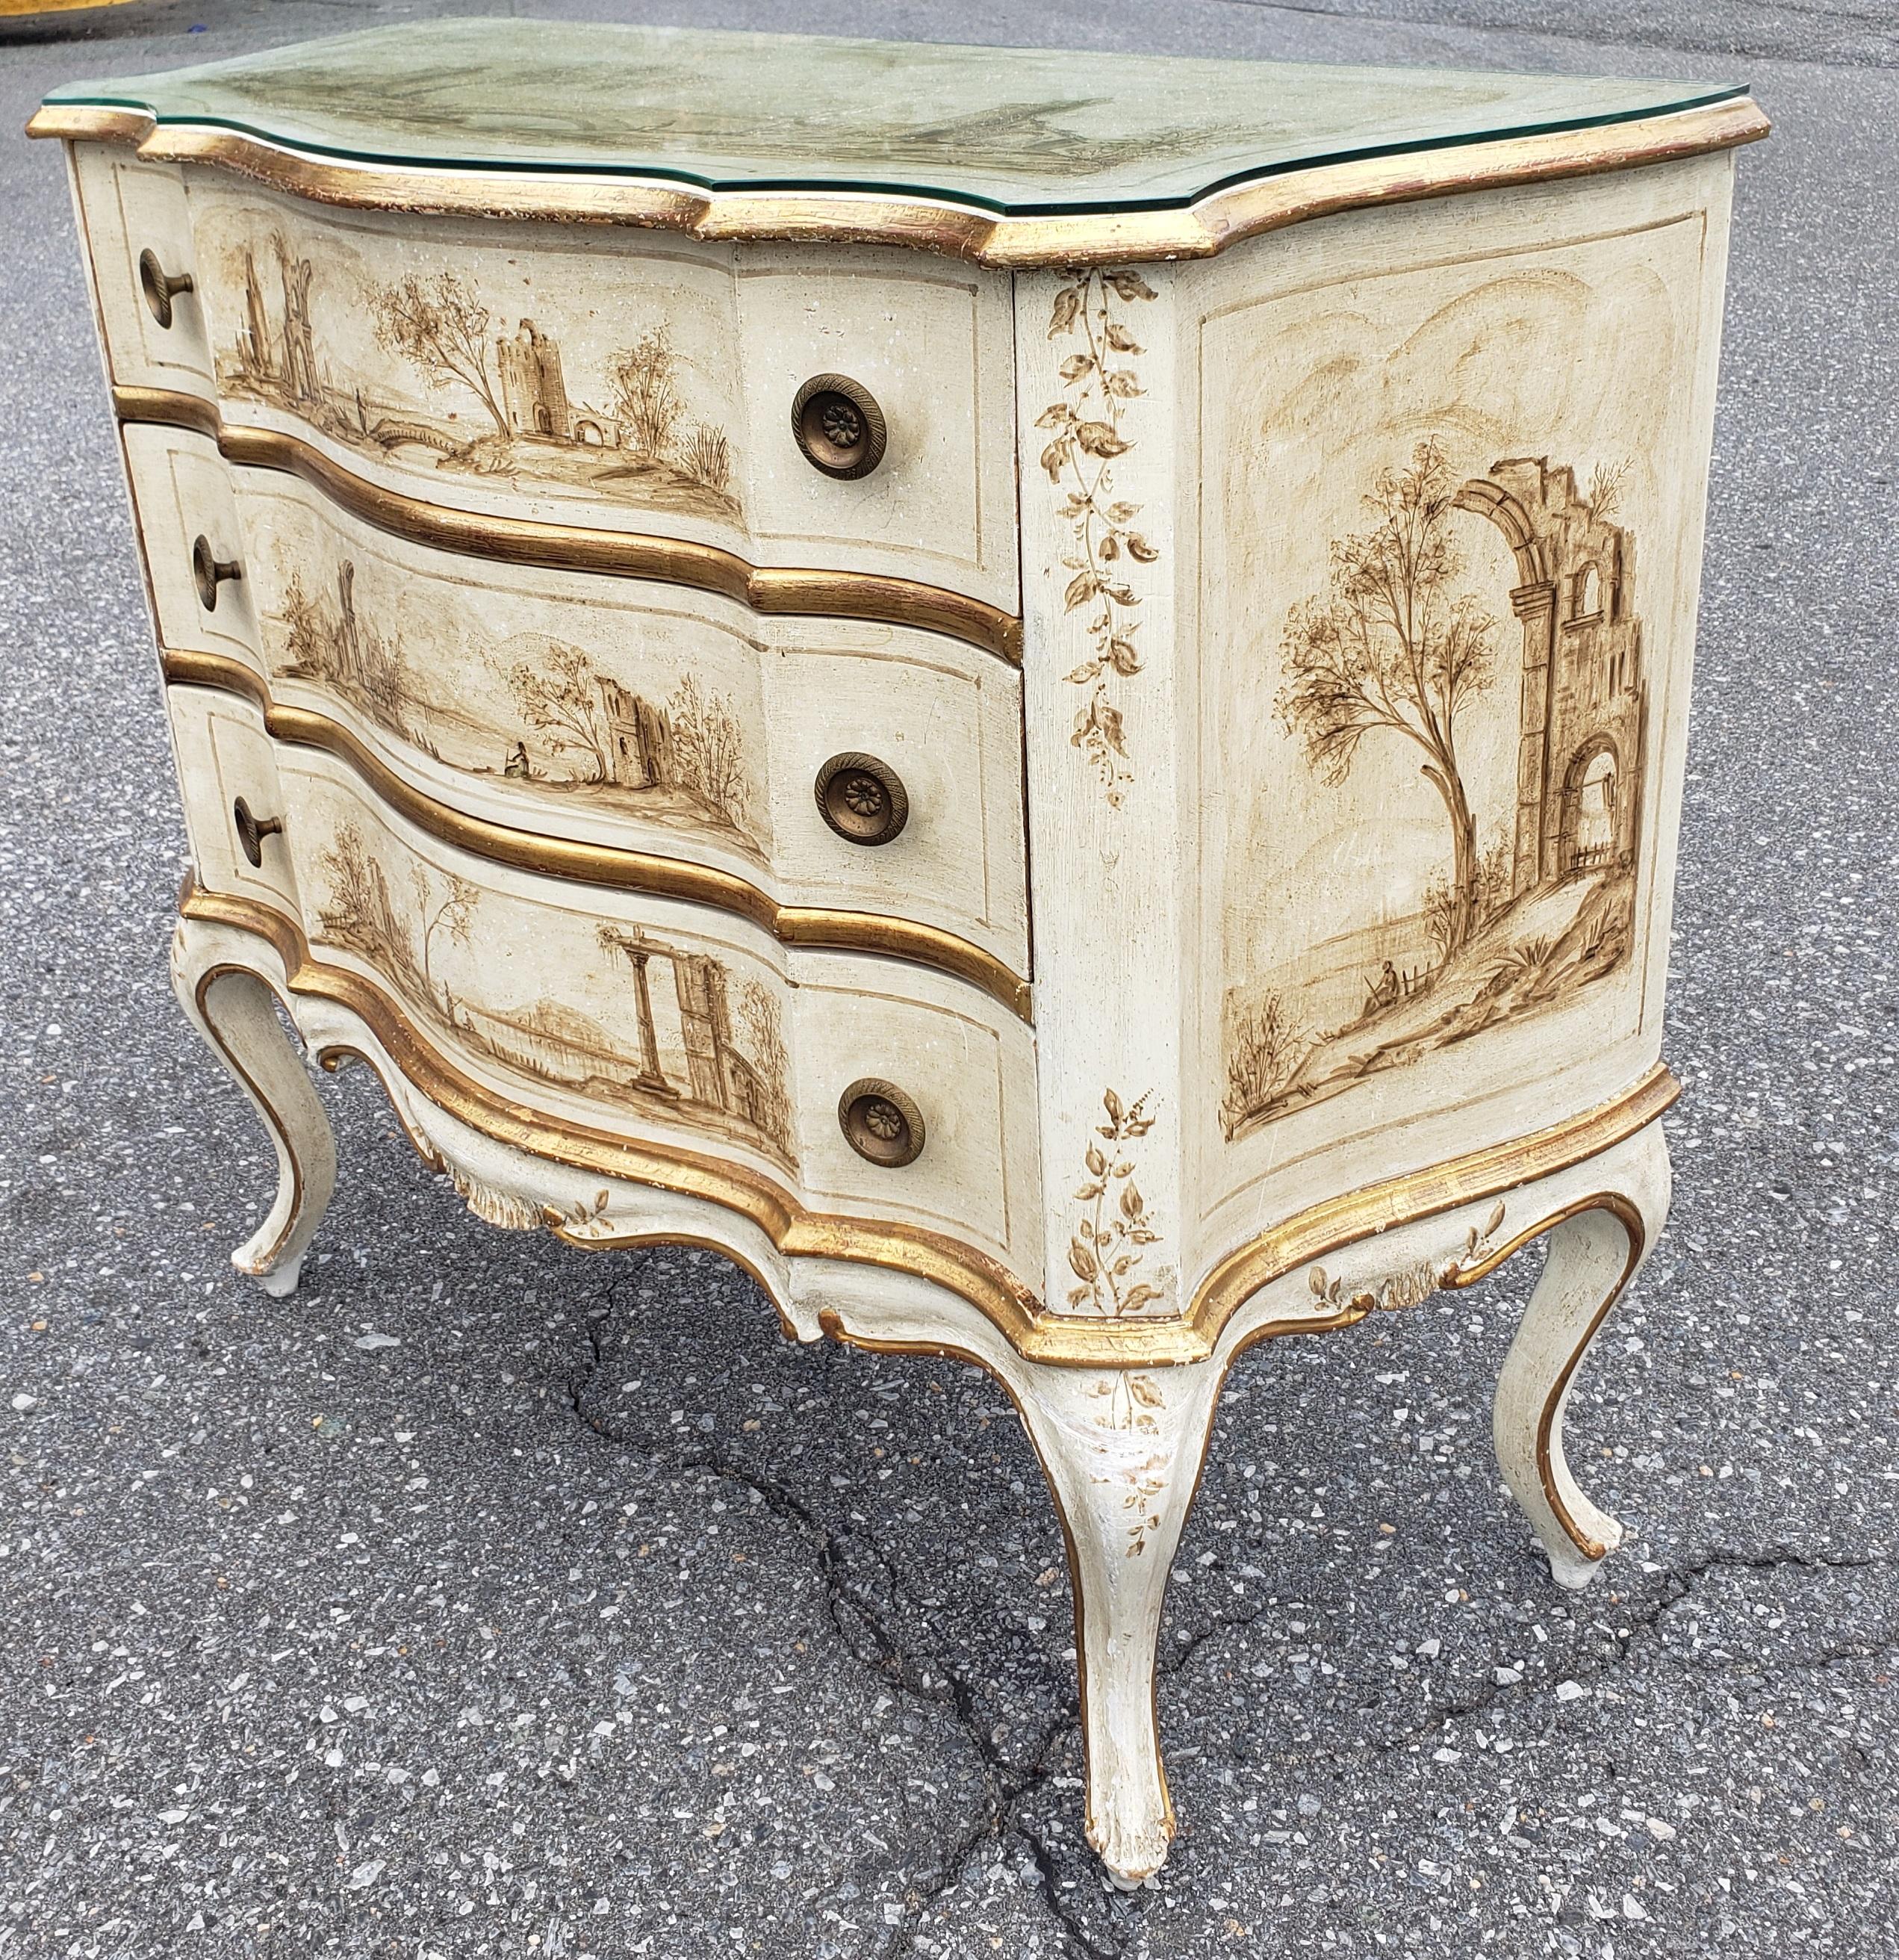 Hardwood Early 20th C. Venetian Hand-Painted and Decorated Partial Gilt Commode w/ Glass For Sale